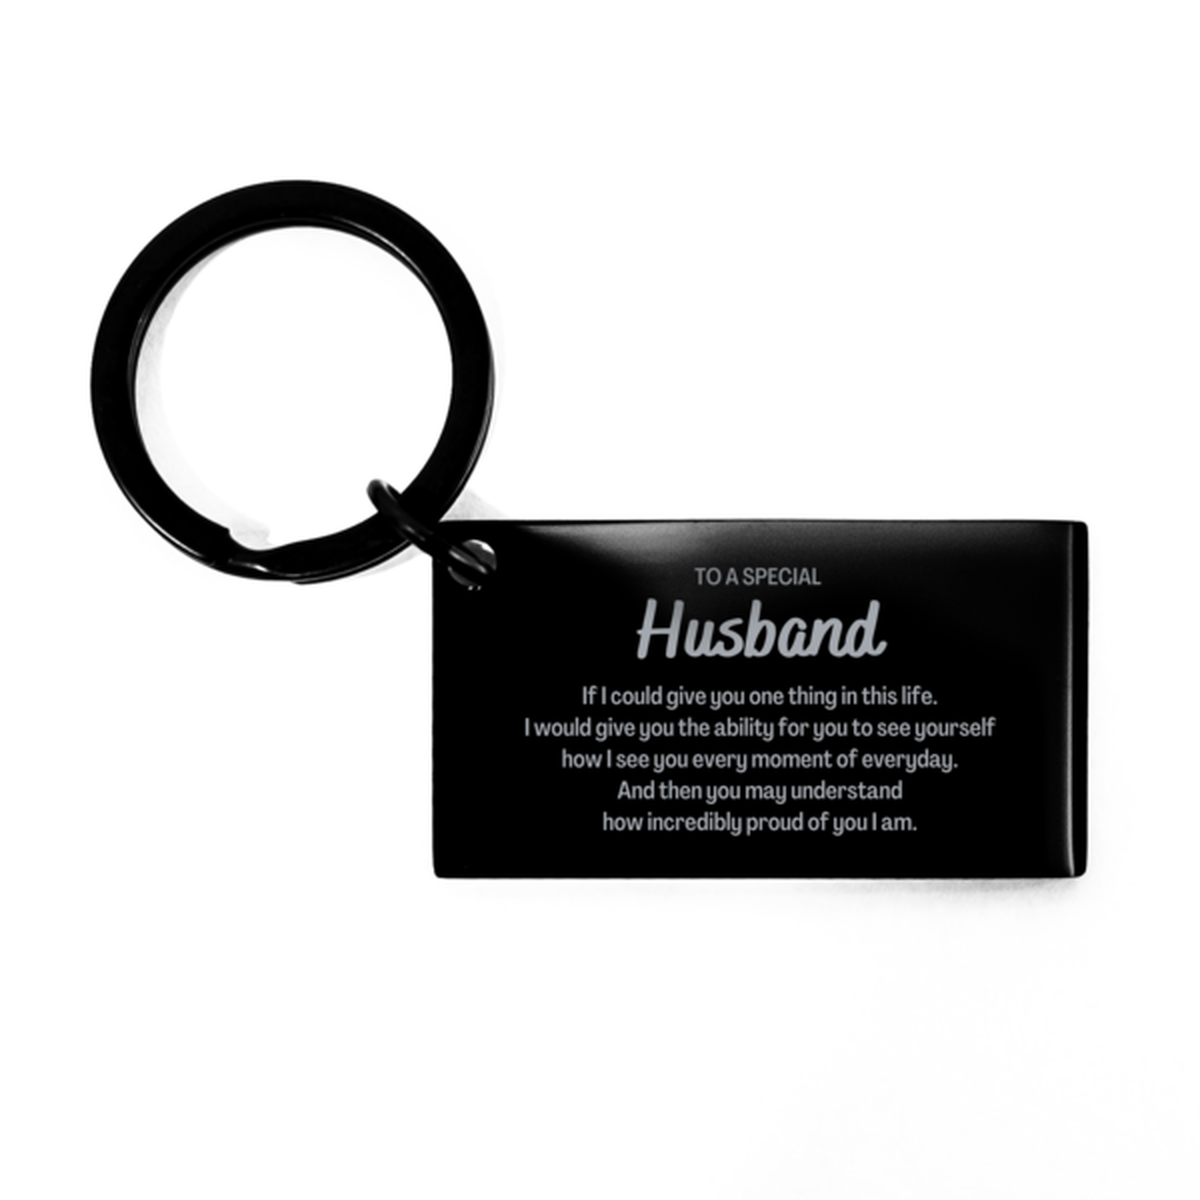 To My Husband Keychain, Gifts For Husband Engraved, Inspirational Gifts for Christmas Birthday, Epic Gifts for Husband To A Special Husband how incredibly proud of you I am